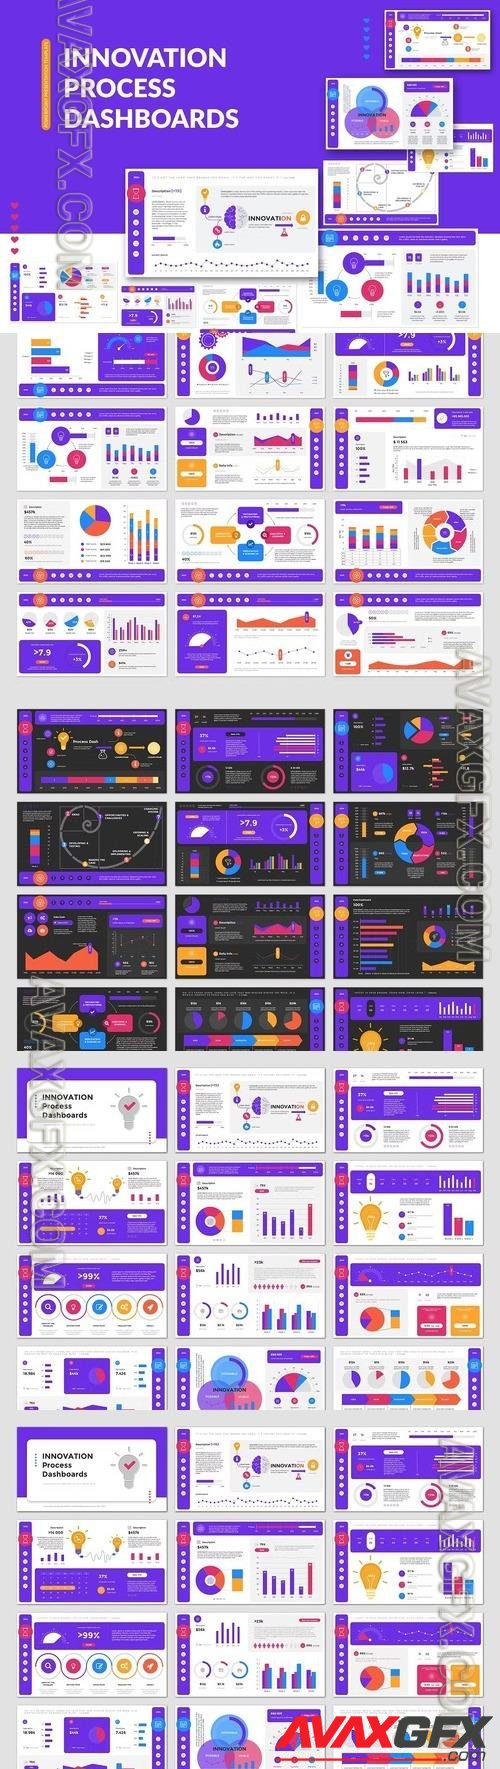 Innovation Process Dashboards PowerPoint Template [PPTX]